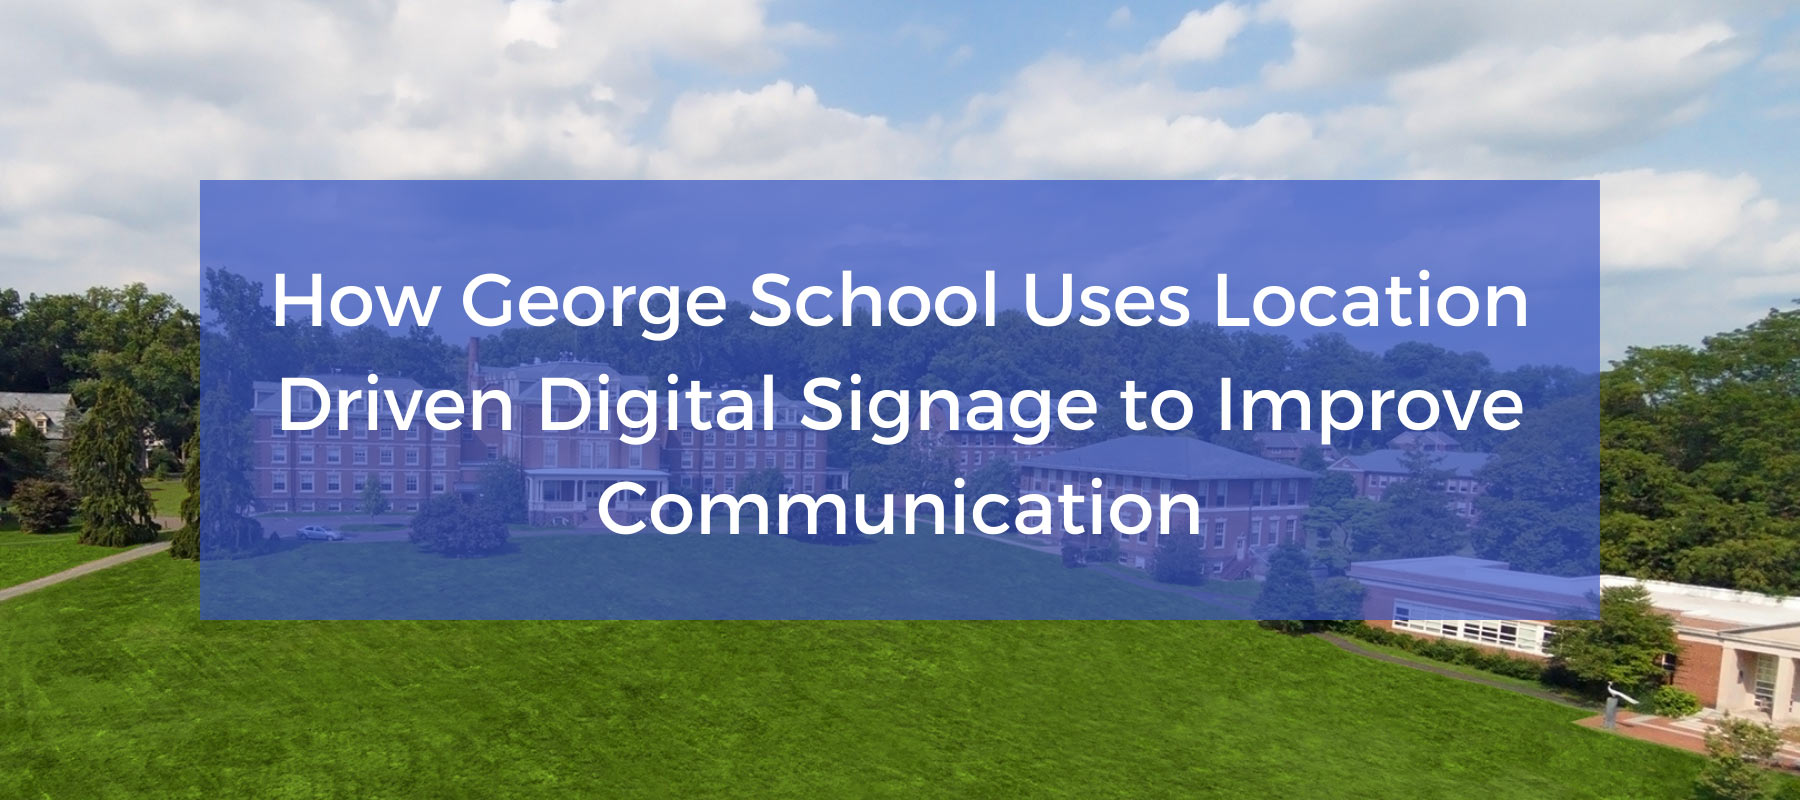 How George School Uses Location Driven Digital Signage to Improve Communication